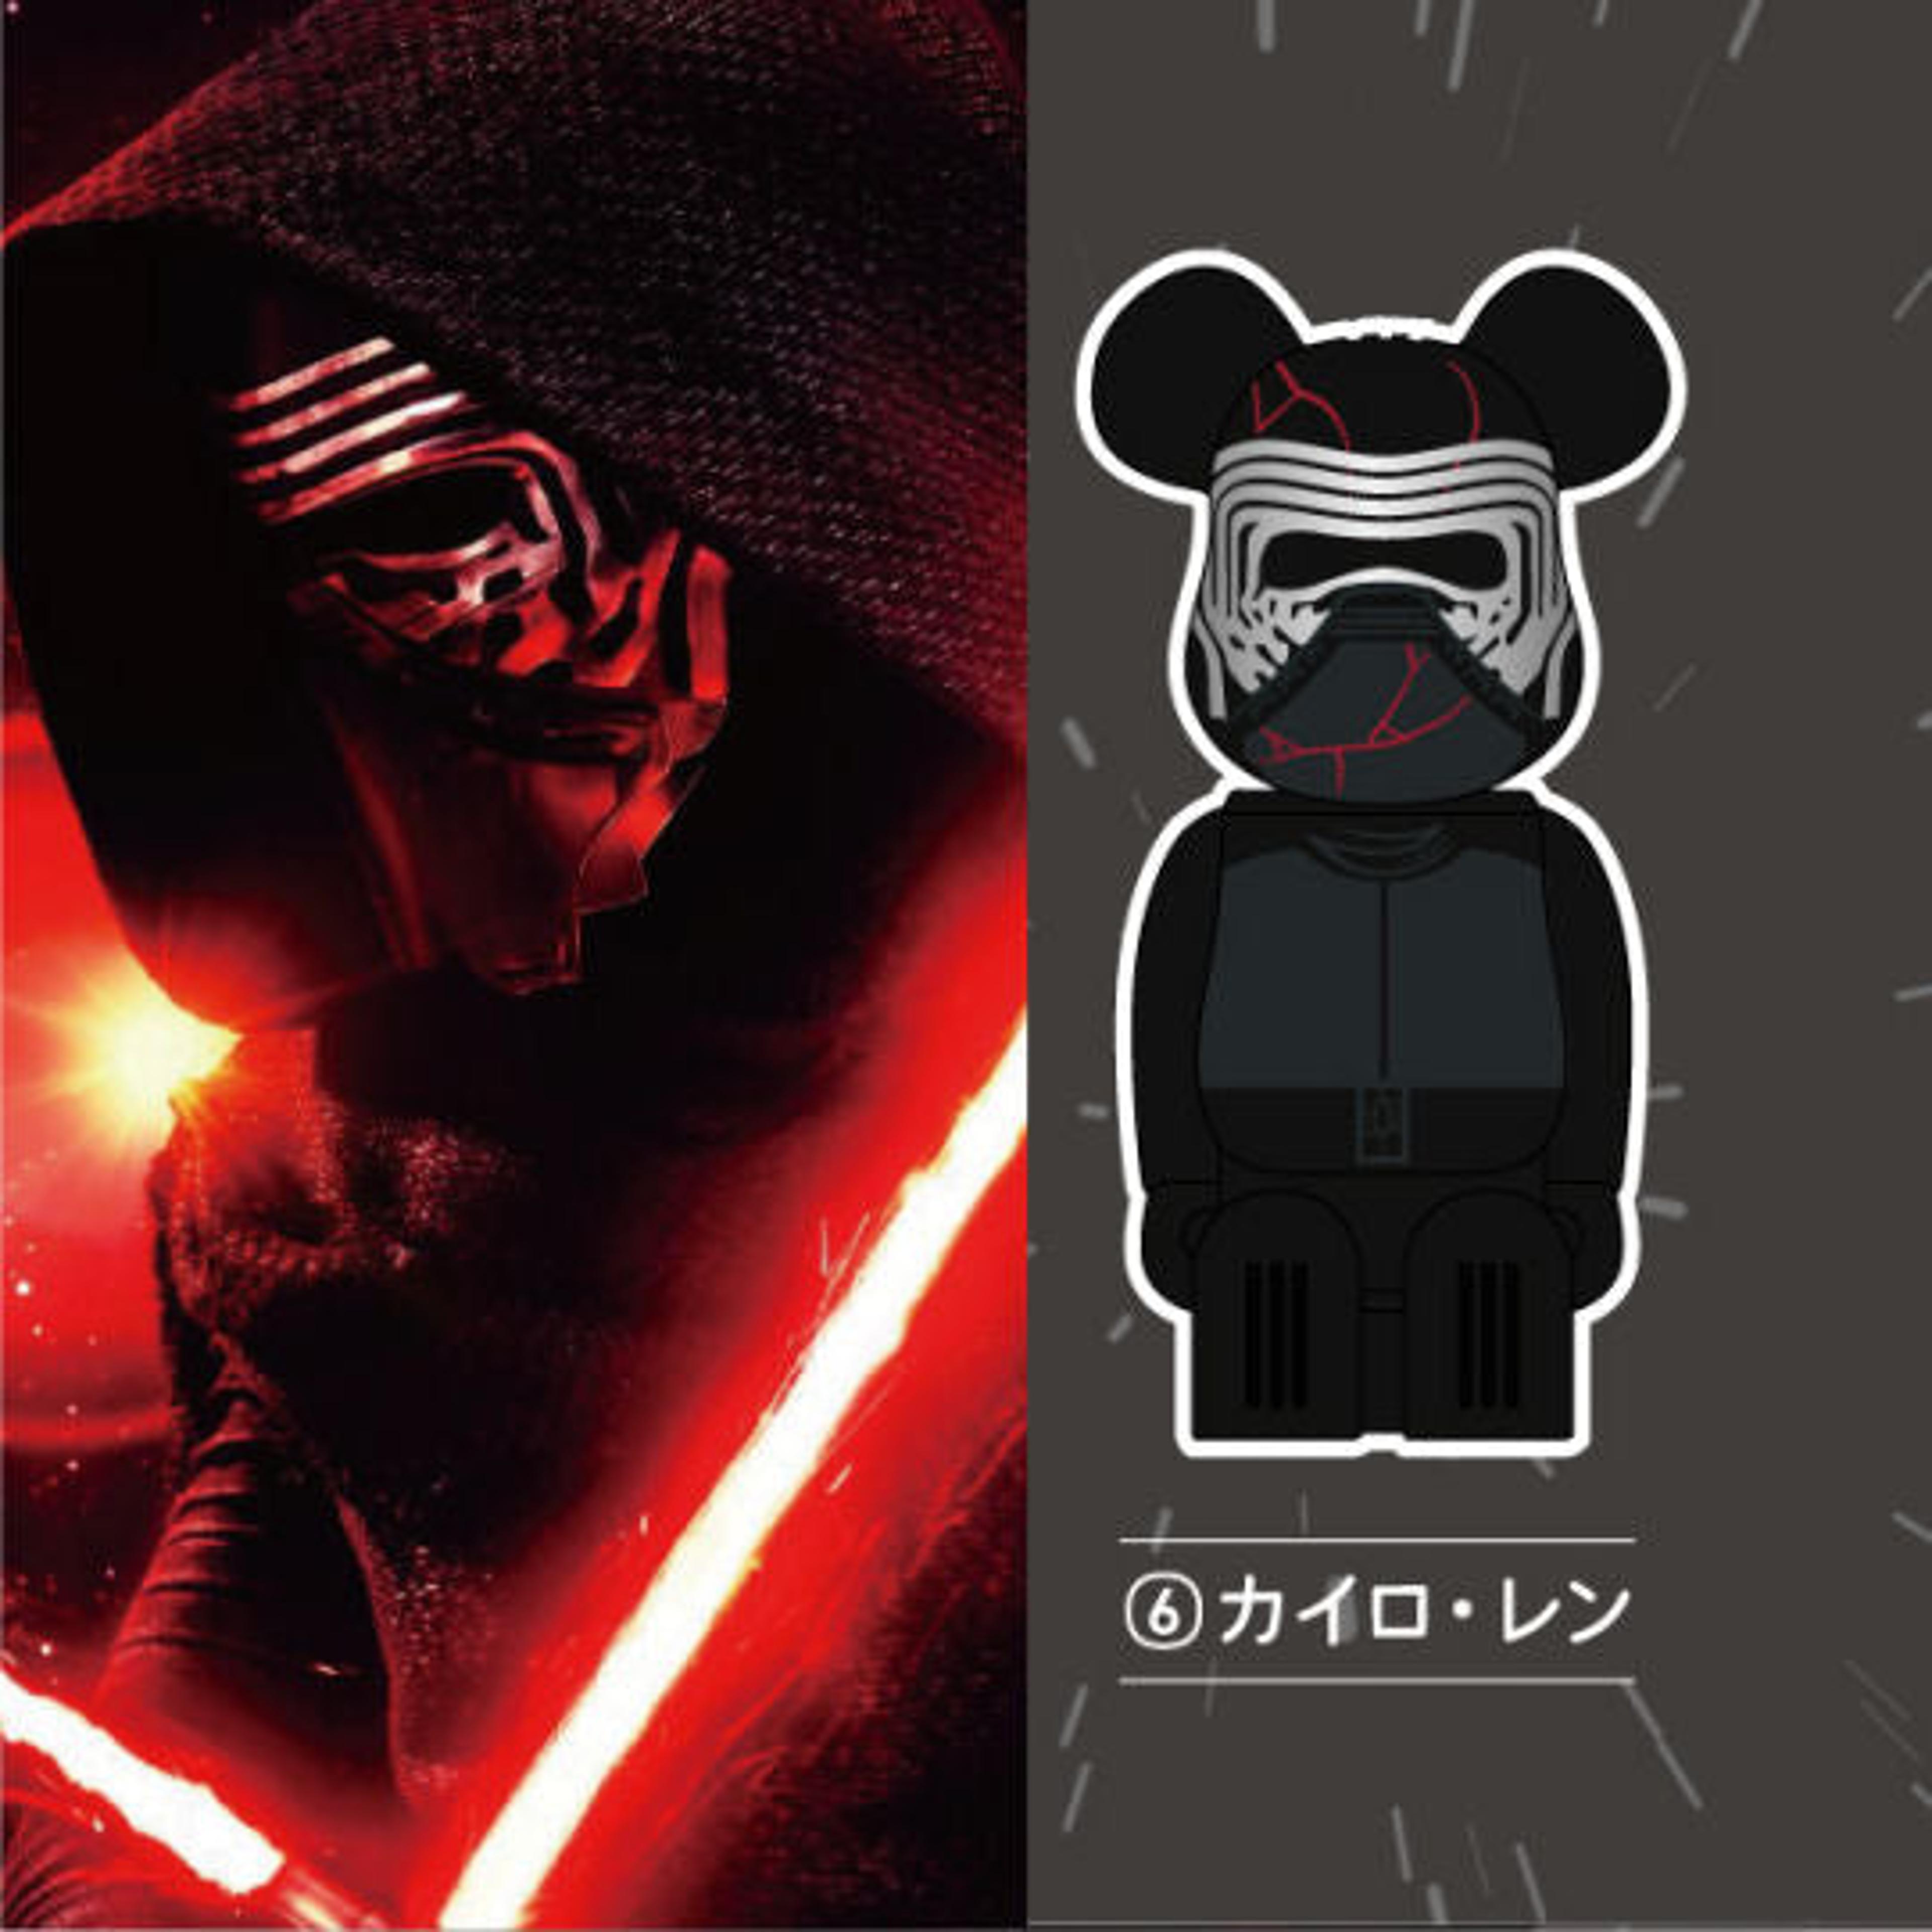 Alternate View 5 of Medicom Toy BE＠RBRICK Cleverin Star Wars 6 Piece Compete Set L